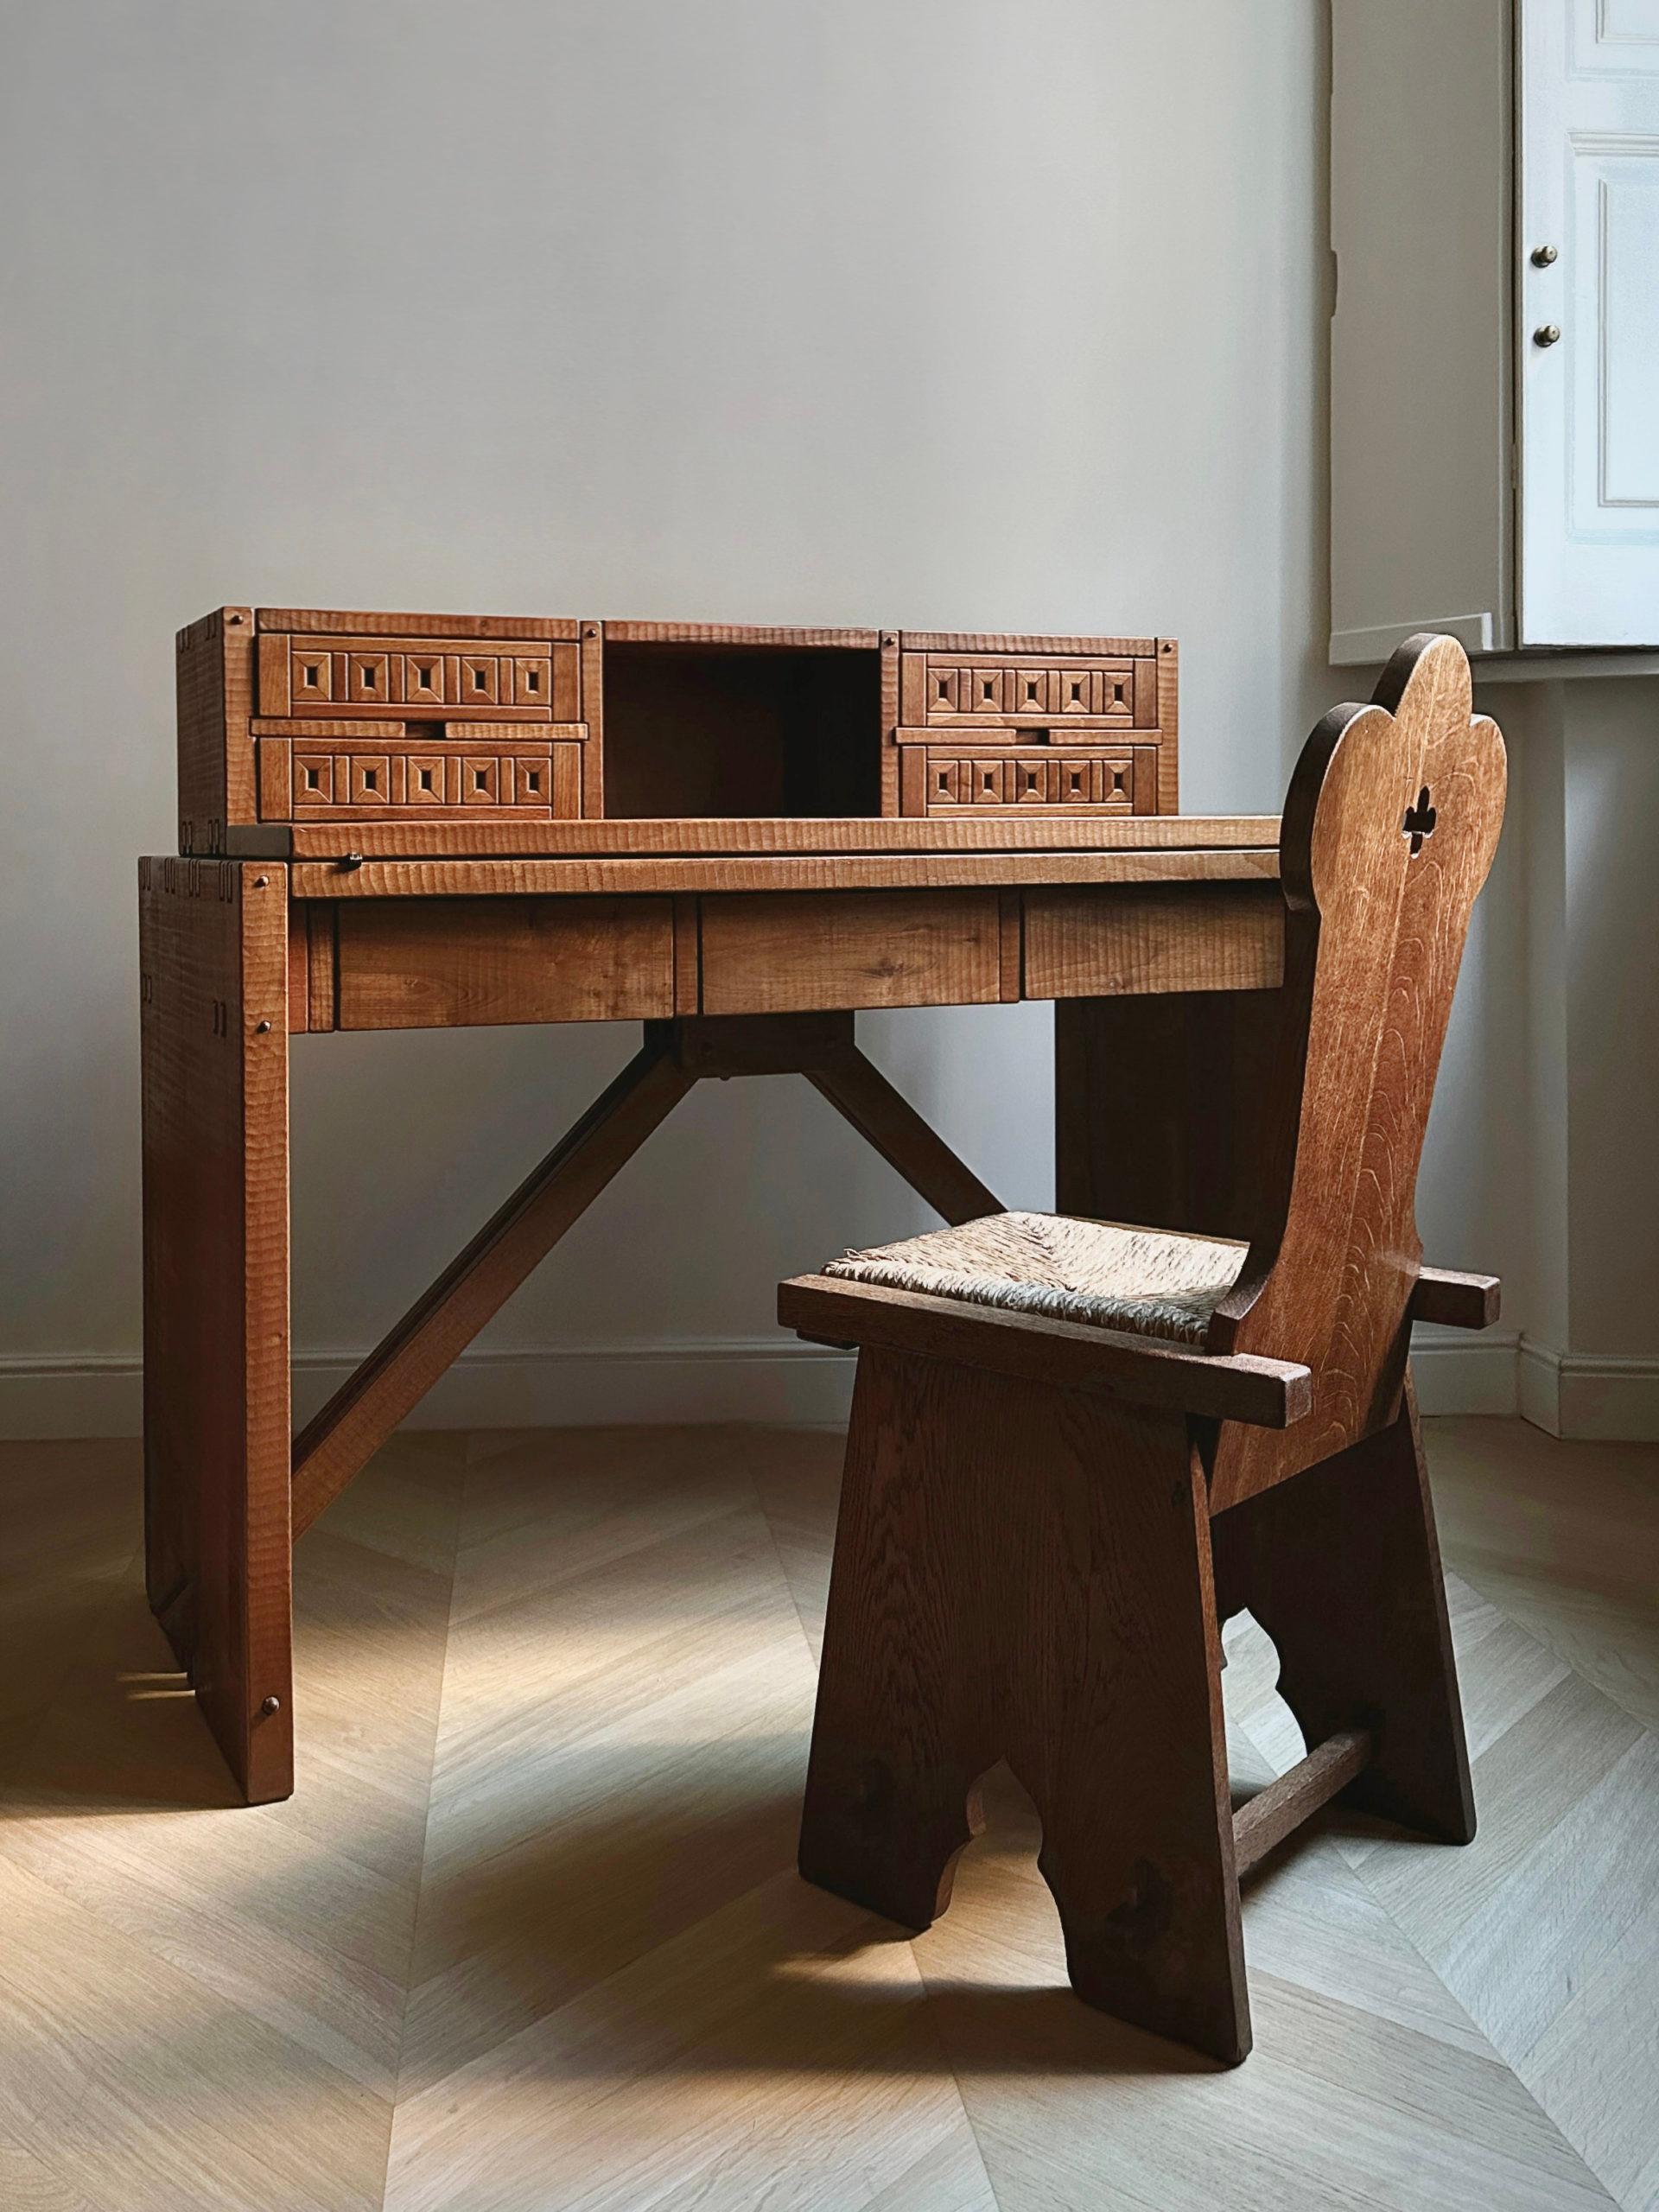 This stunning one of a kind folding desk embodies a striking textured surface that is hand carved by gouge cut in walnut. It gives the piece its distinctive aesthetic that Rivadossi is known for. Bold and beautiful wood joinery details are present